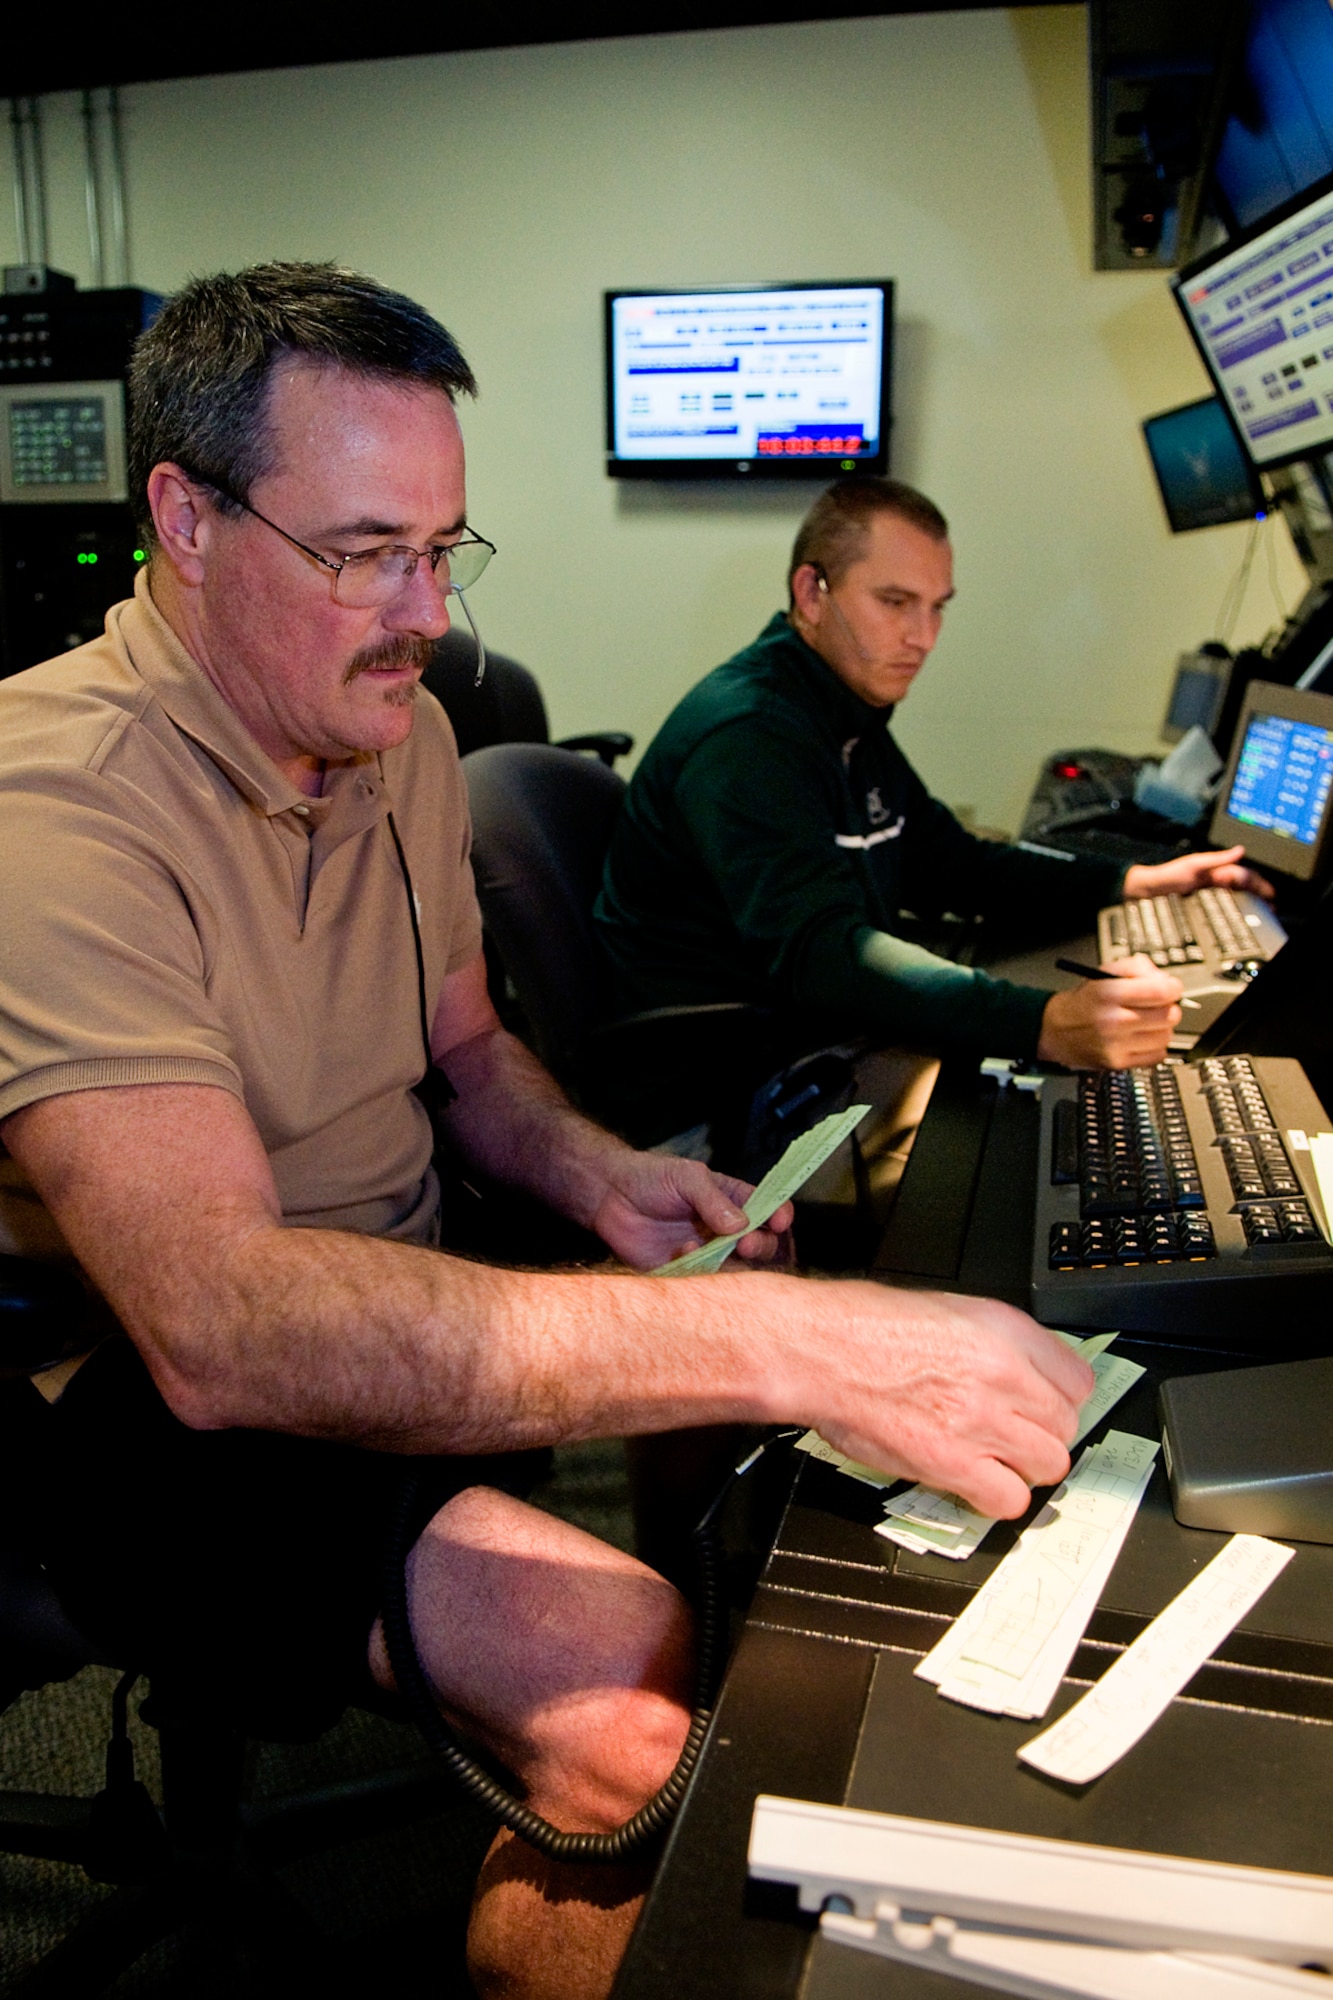 Charles Barrett, left, and Keith Atkinson, both 434th Operations Support Squadron air traffic control specialists manage air traffic at Grissom Air Reserve Base, Ind., Sept. 29, 2014. Grissom ATC normally controls all commercial, civilian and military air traffic up to 10,000 feet between Chicago and Indianapolis, going as far west as Lafayette, Indiana, which is an area of more than 11,000 cubic miles. (U.S. Air Force photo/Mark R. W. Orders-Woempner)
